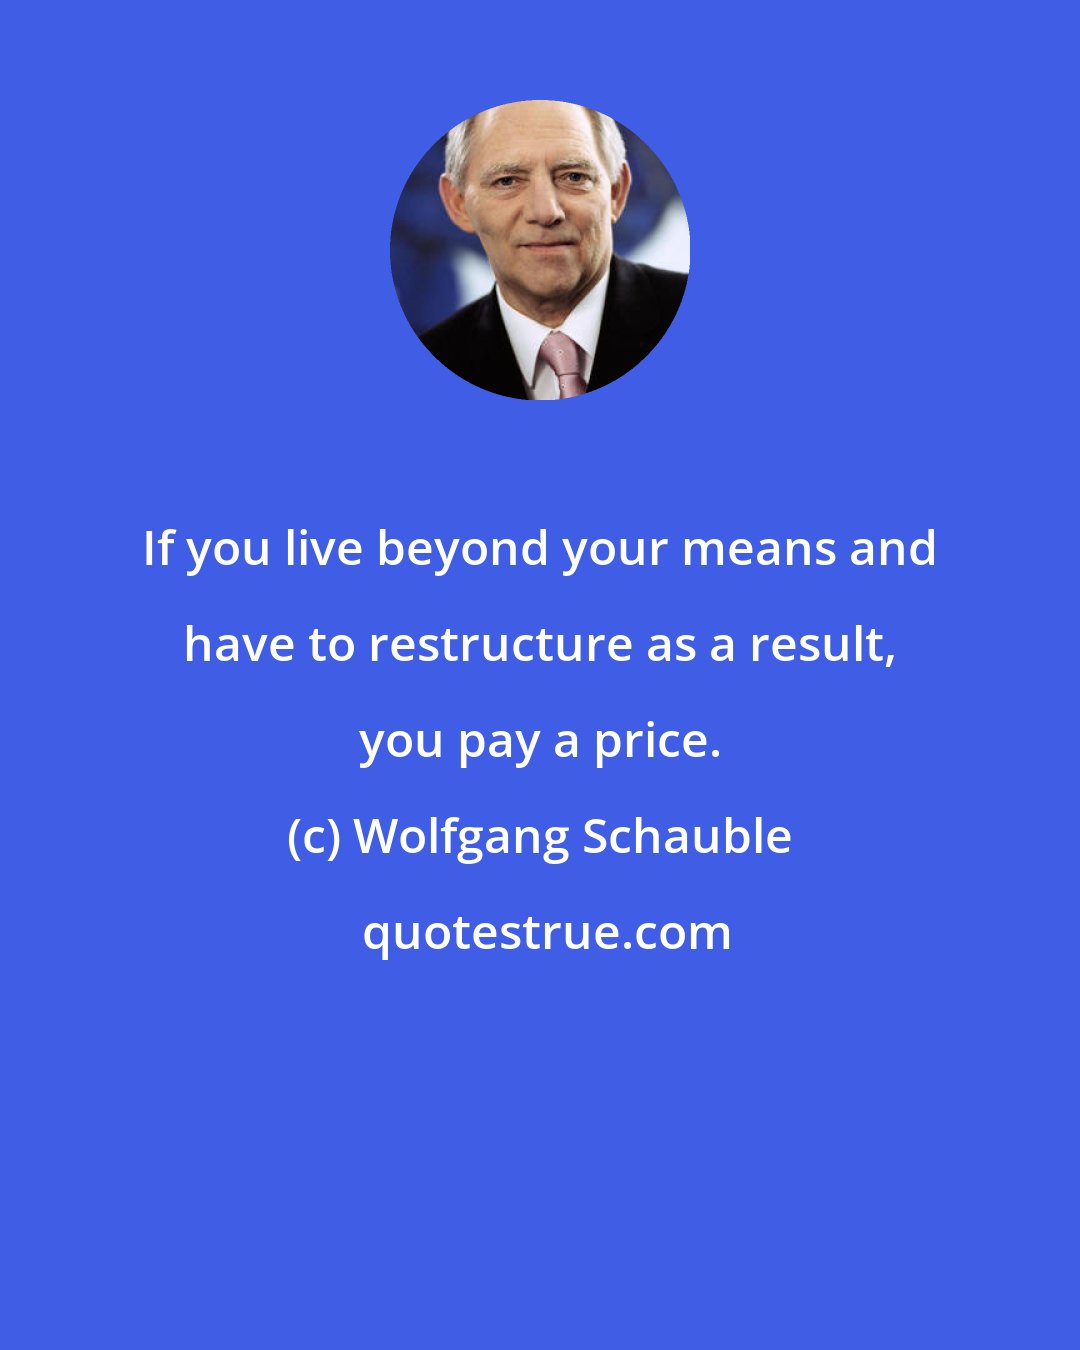 Wolfgang Schauble: If you live beyond your means and have to restructure as a result, you pay a price.